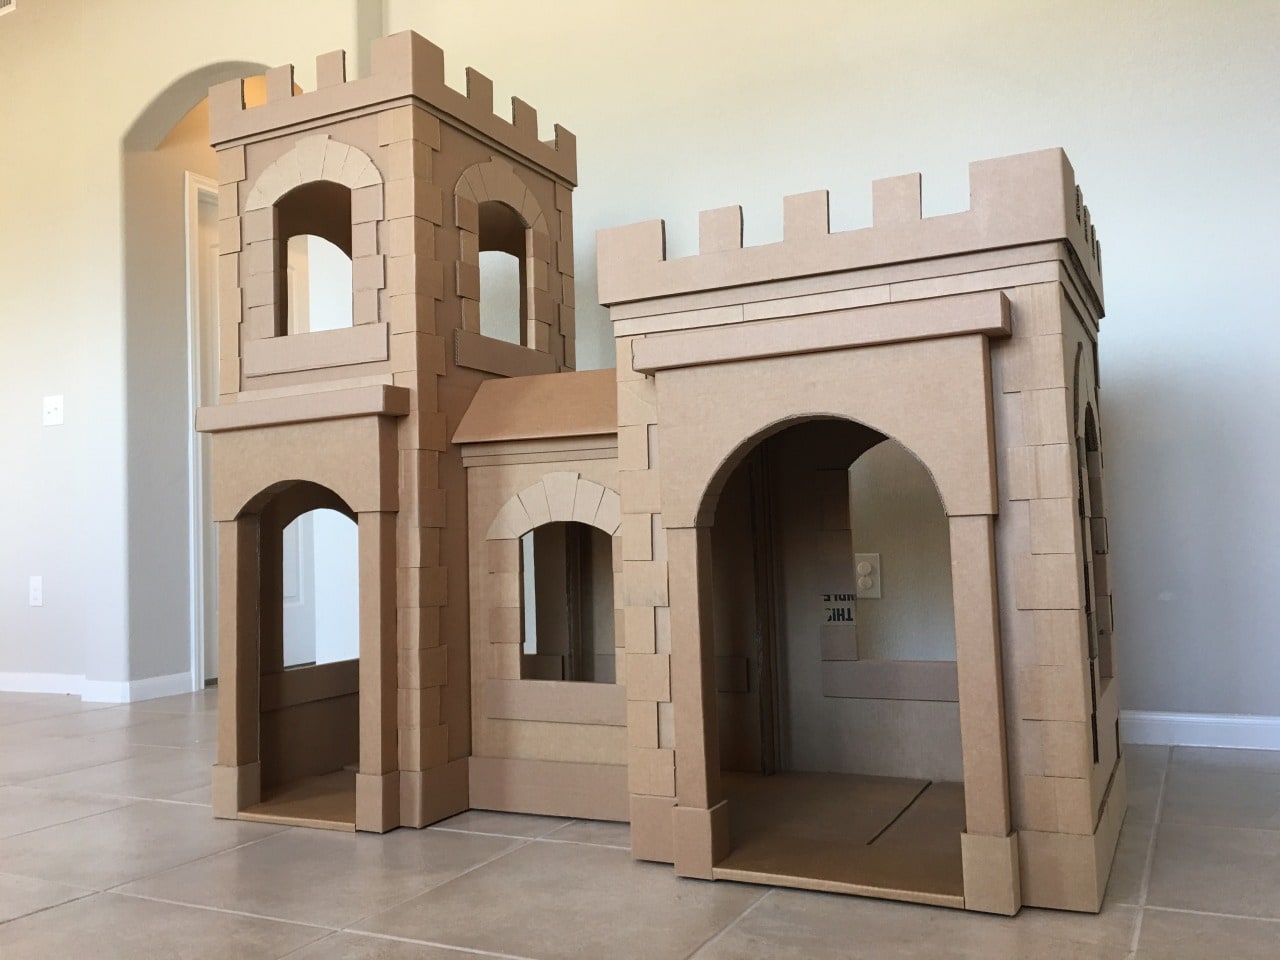 a-kid-s-dream-cardboard-castle-made-out-of-boxes-brandon-tran